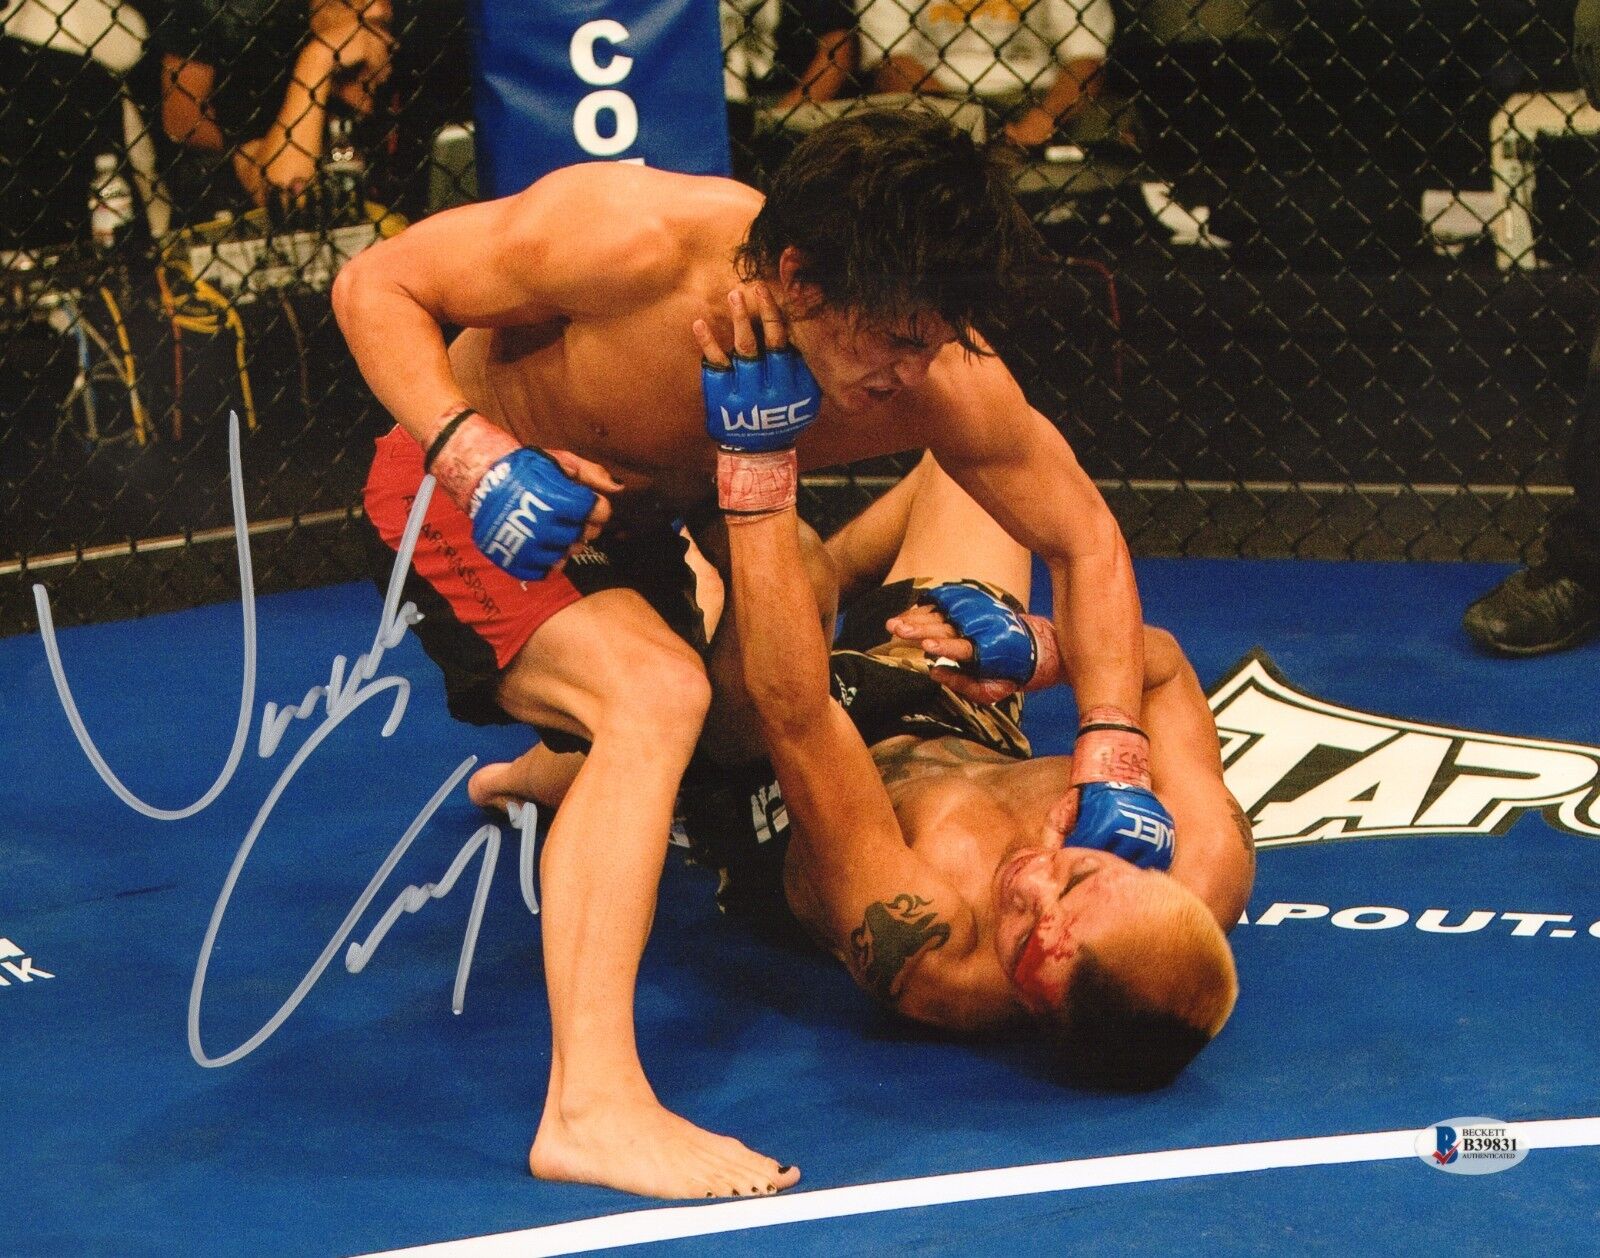 Ian McCall Signed 11x14 Photo Poster painting BAS Beckett COA UFC WEC 30 Fight Picture Autograph